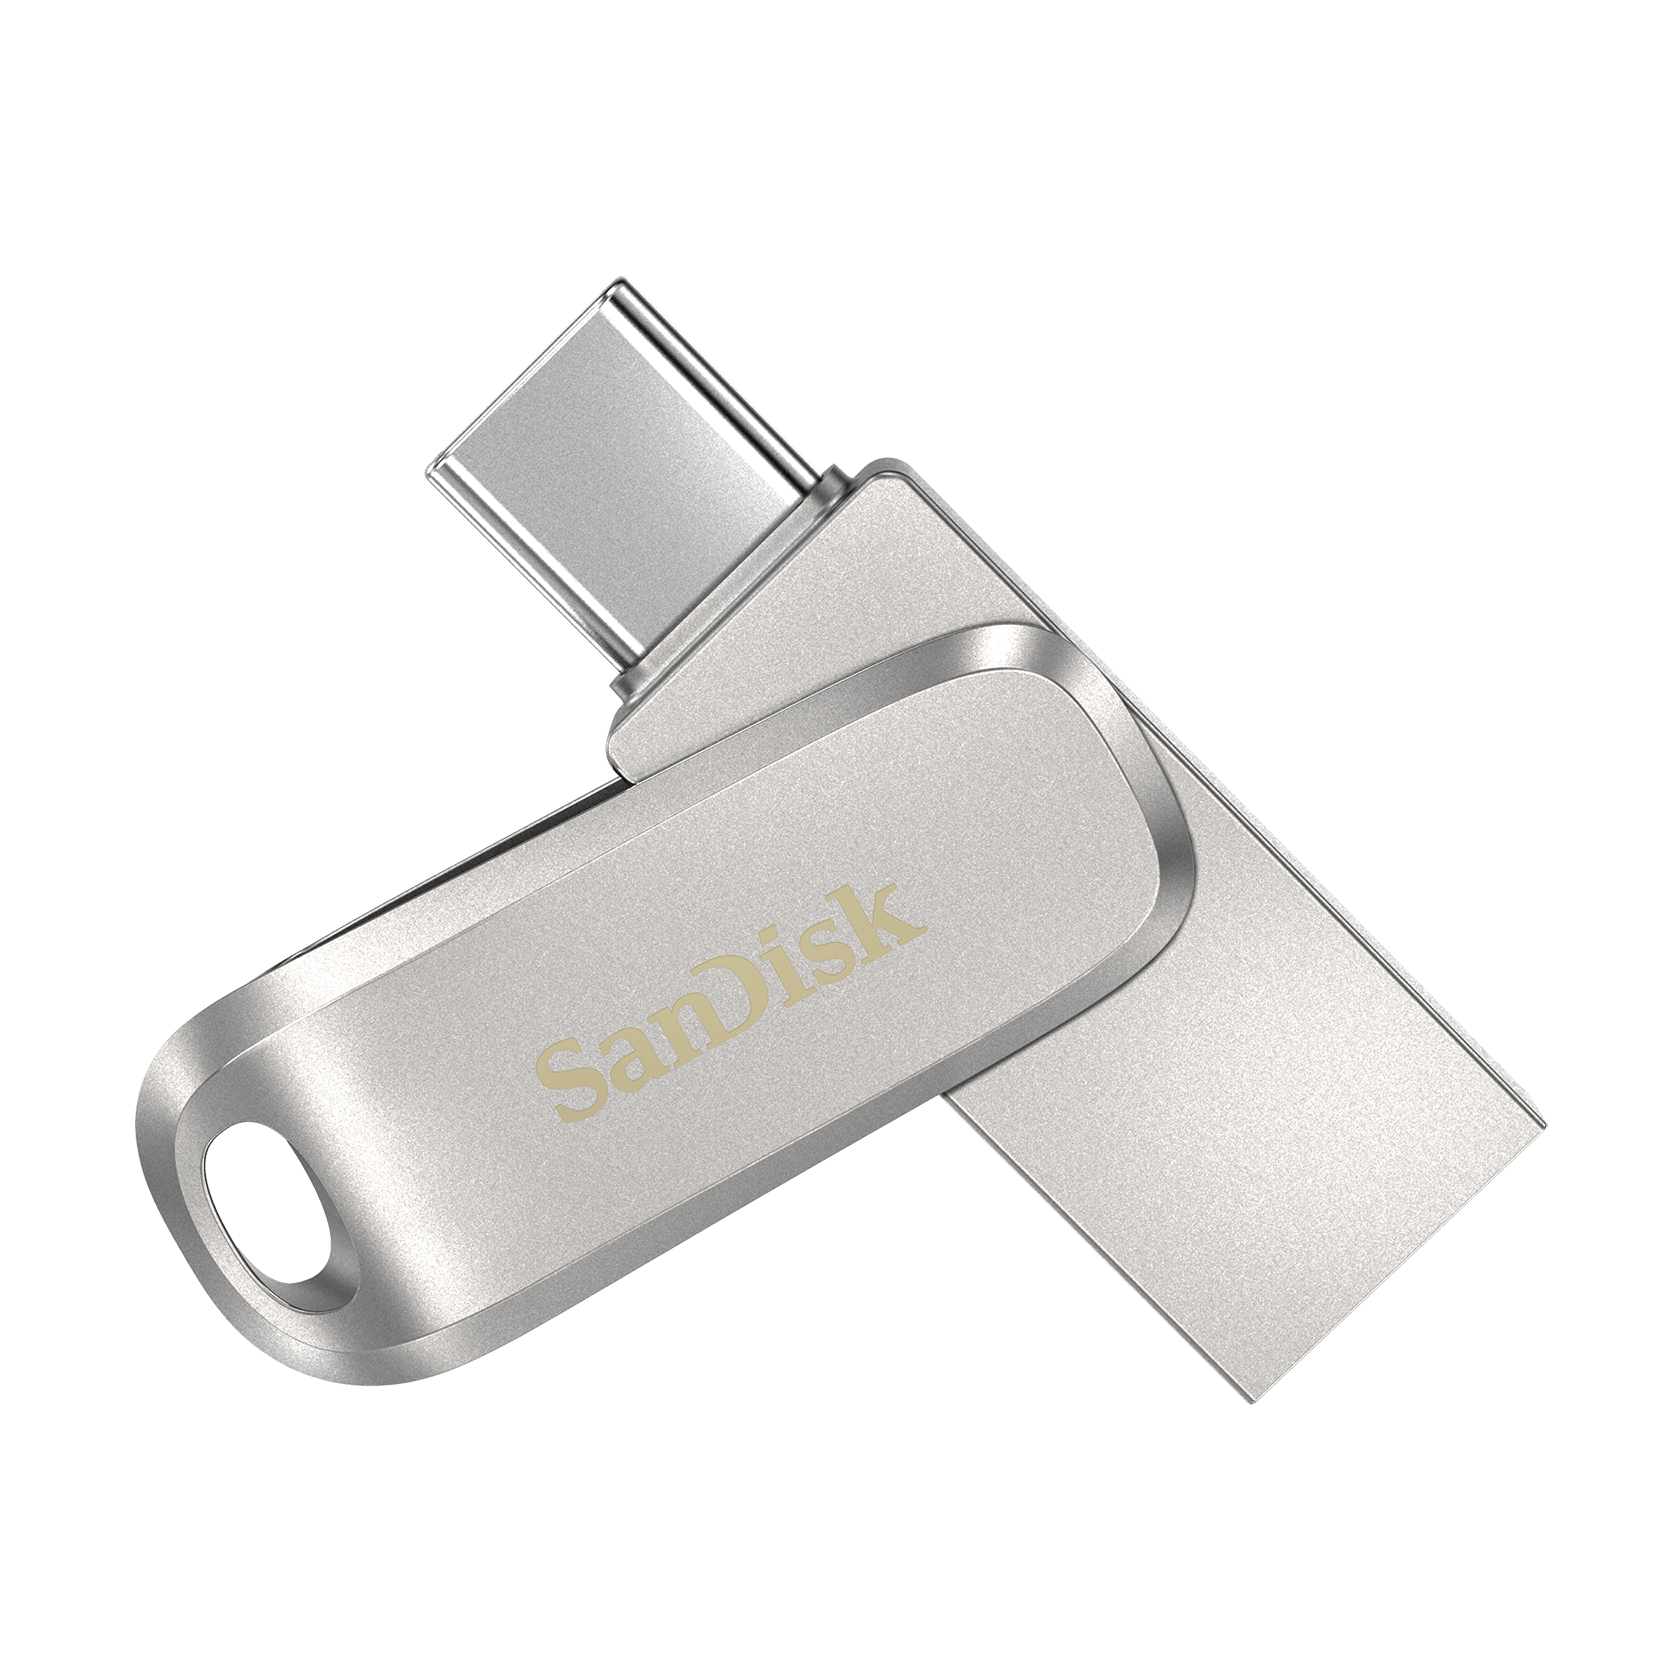 SanDisk 256GB Ultra Dual Drive Luxe USB Type-C Flash Drive - SDDDC4-256G-G46 - image 1 of 8